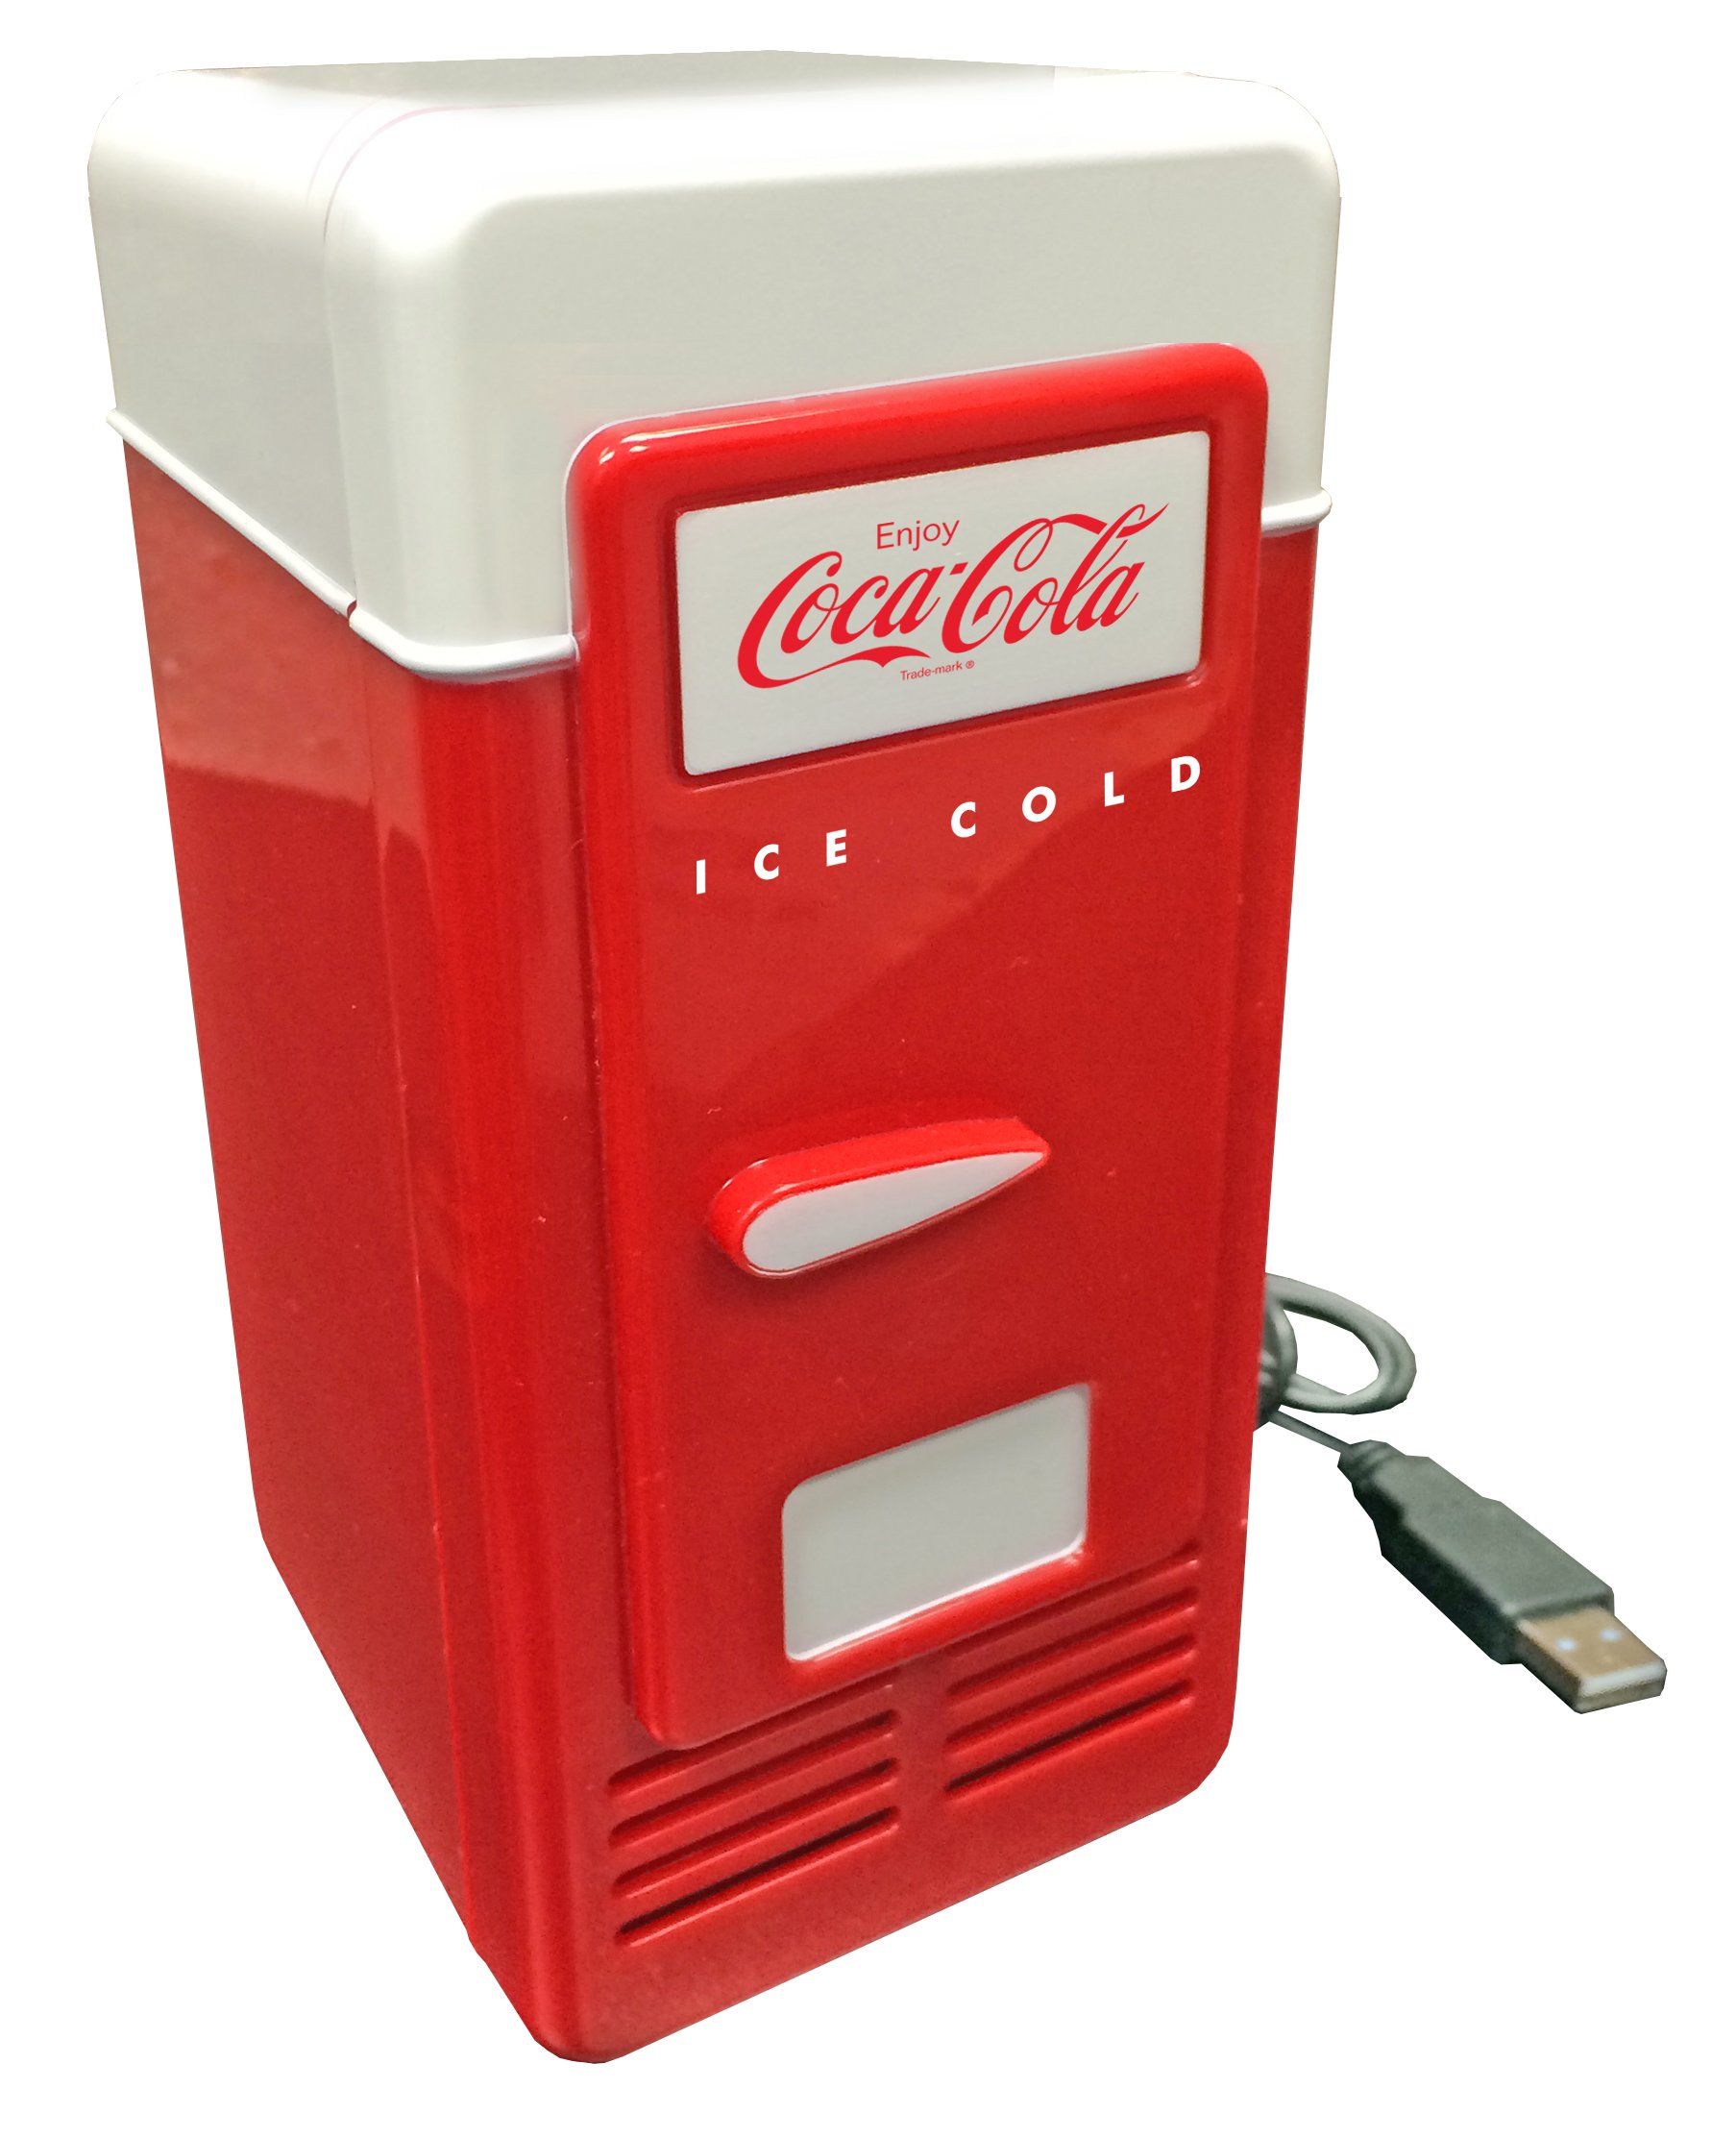 Coca-Cola Single Can Cooler, Red, USB Powered Retro One Can Mini Fridge, Thermoelectric Cooler for Desk, Home, Office, Dorm, Unique Gift for Students or Office Workers